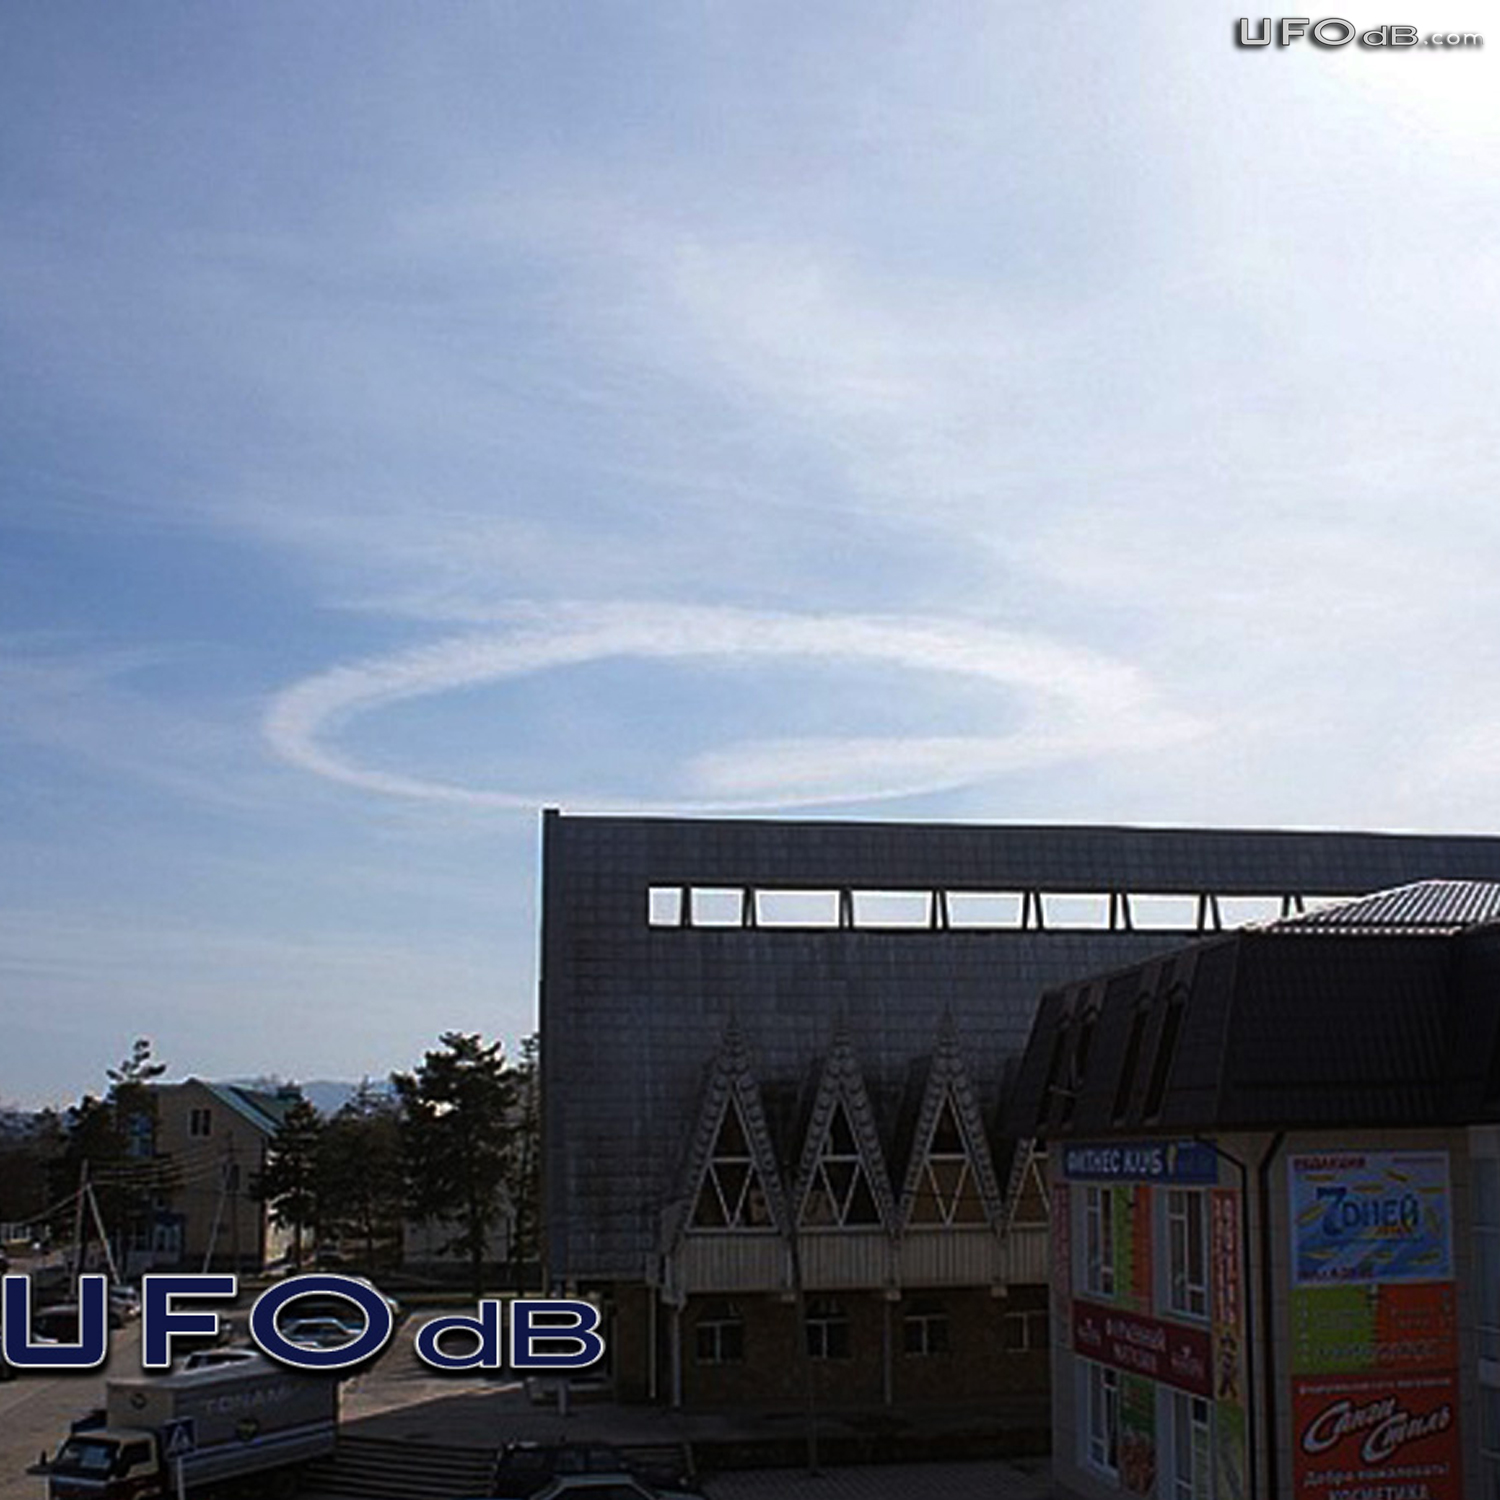 Ring Cloud UFO Float over the village of Abinsk Russia | March 14 2011 UFO Picture #339-2